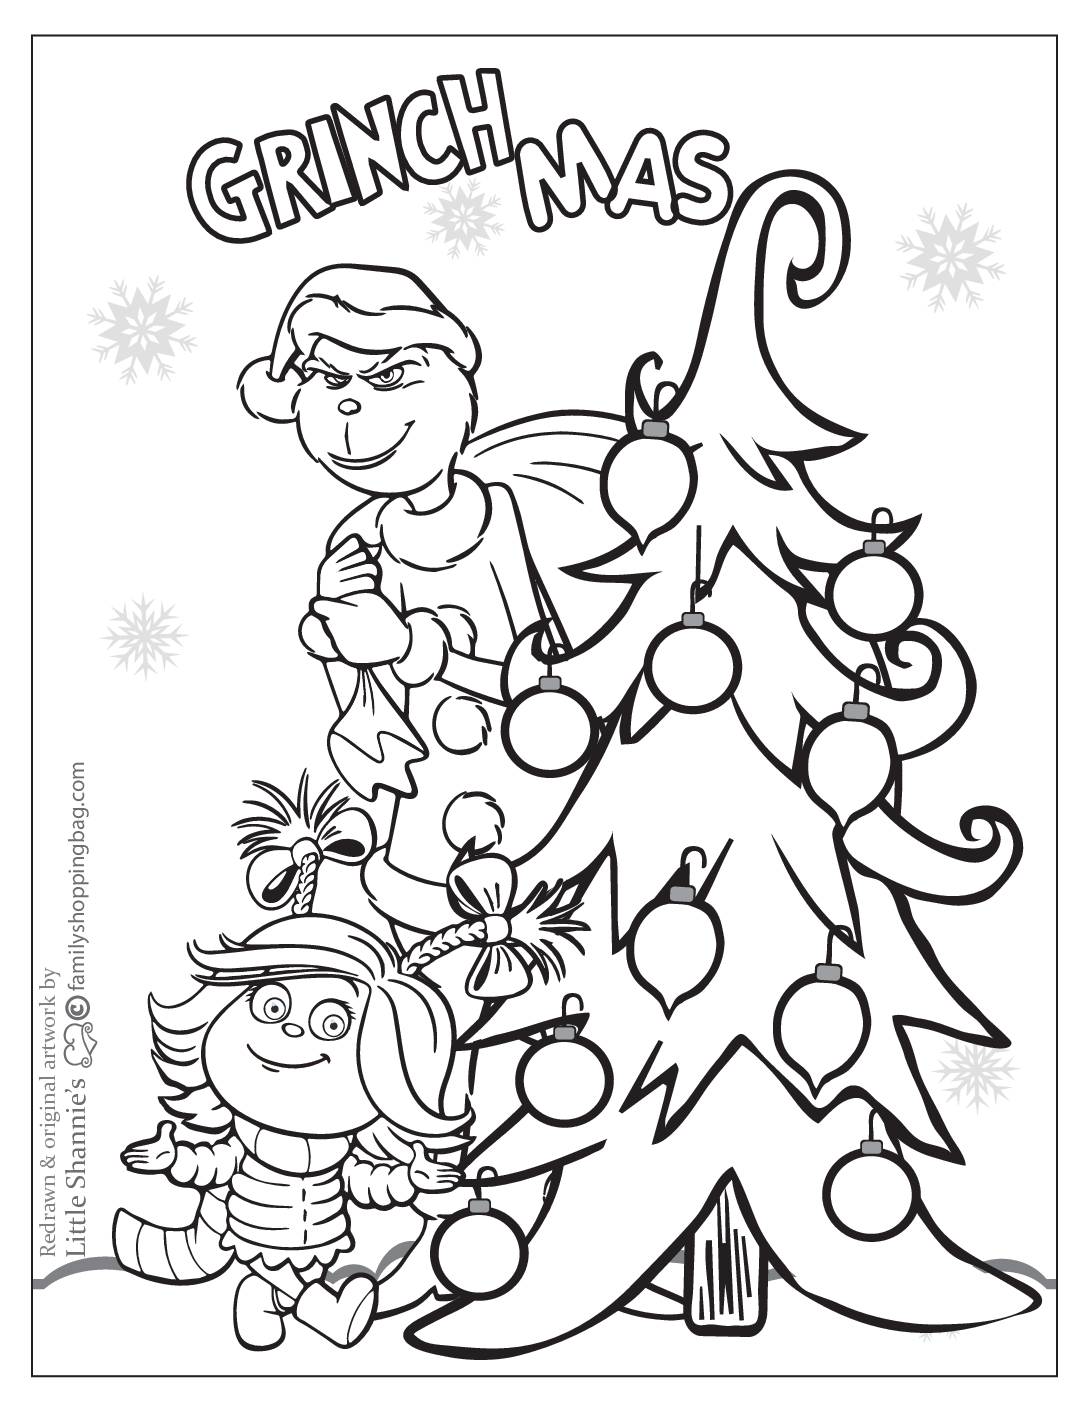 Coloring Page 2 Grinch Coloring Pages